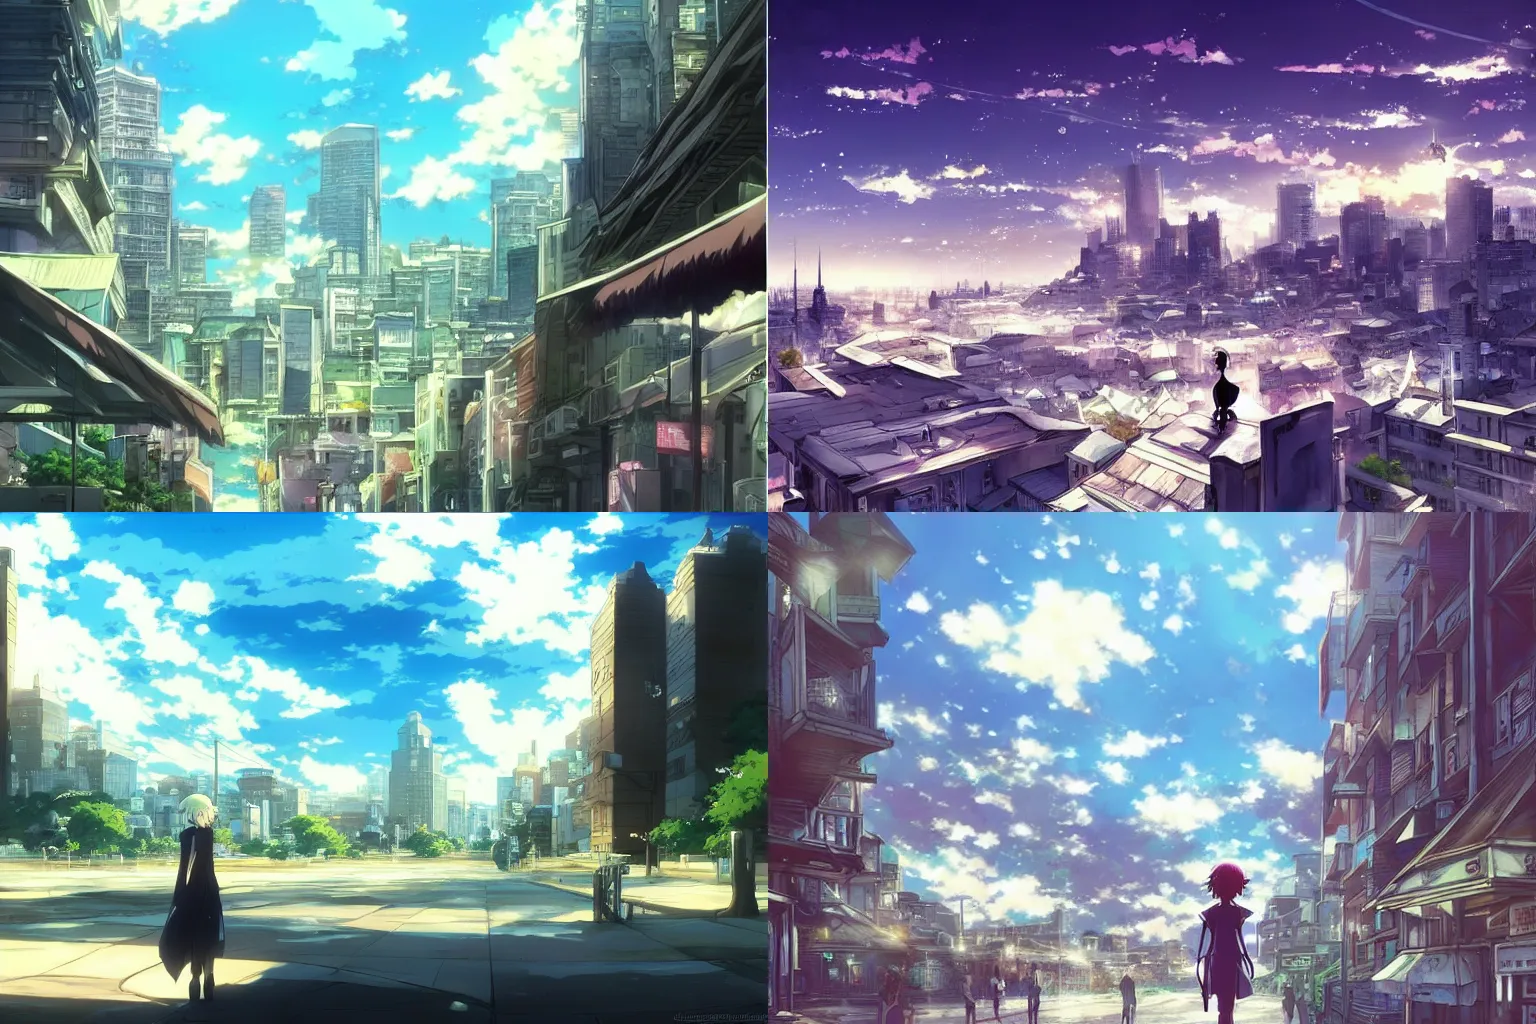 Prompt: infinitely detailed beautiful!, city bright daylight background dreamy!, anime by shinkai makoto, highly detailed, lonely scenery yet peaceful!!, atmospheric, ambient lighting!